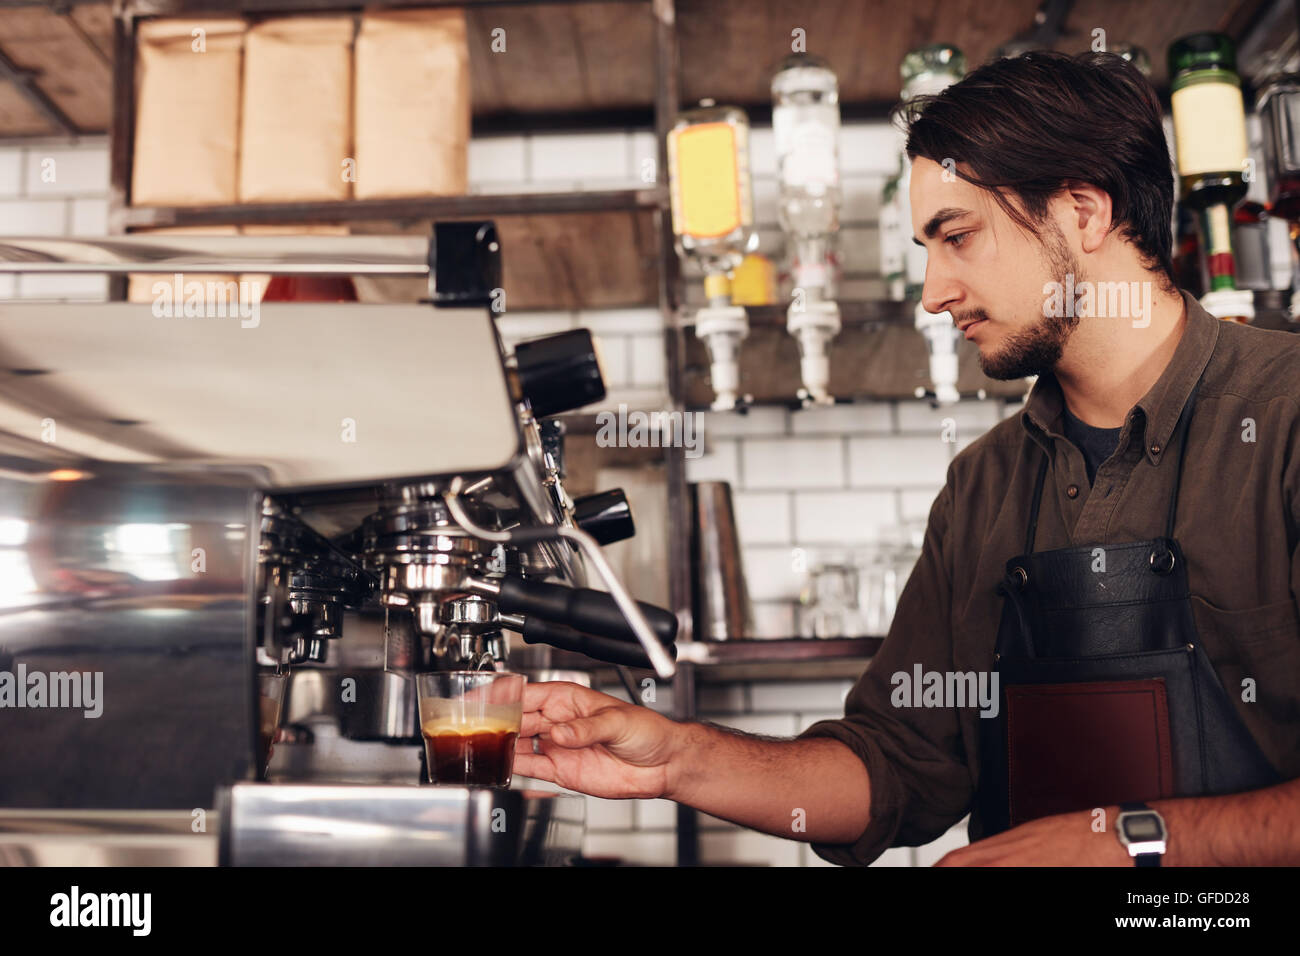 Side view of male barista preparing espresso at coffee shop. Young man in apron making coffee using coffee maker at the cafe. Stock Photo